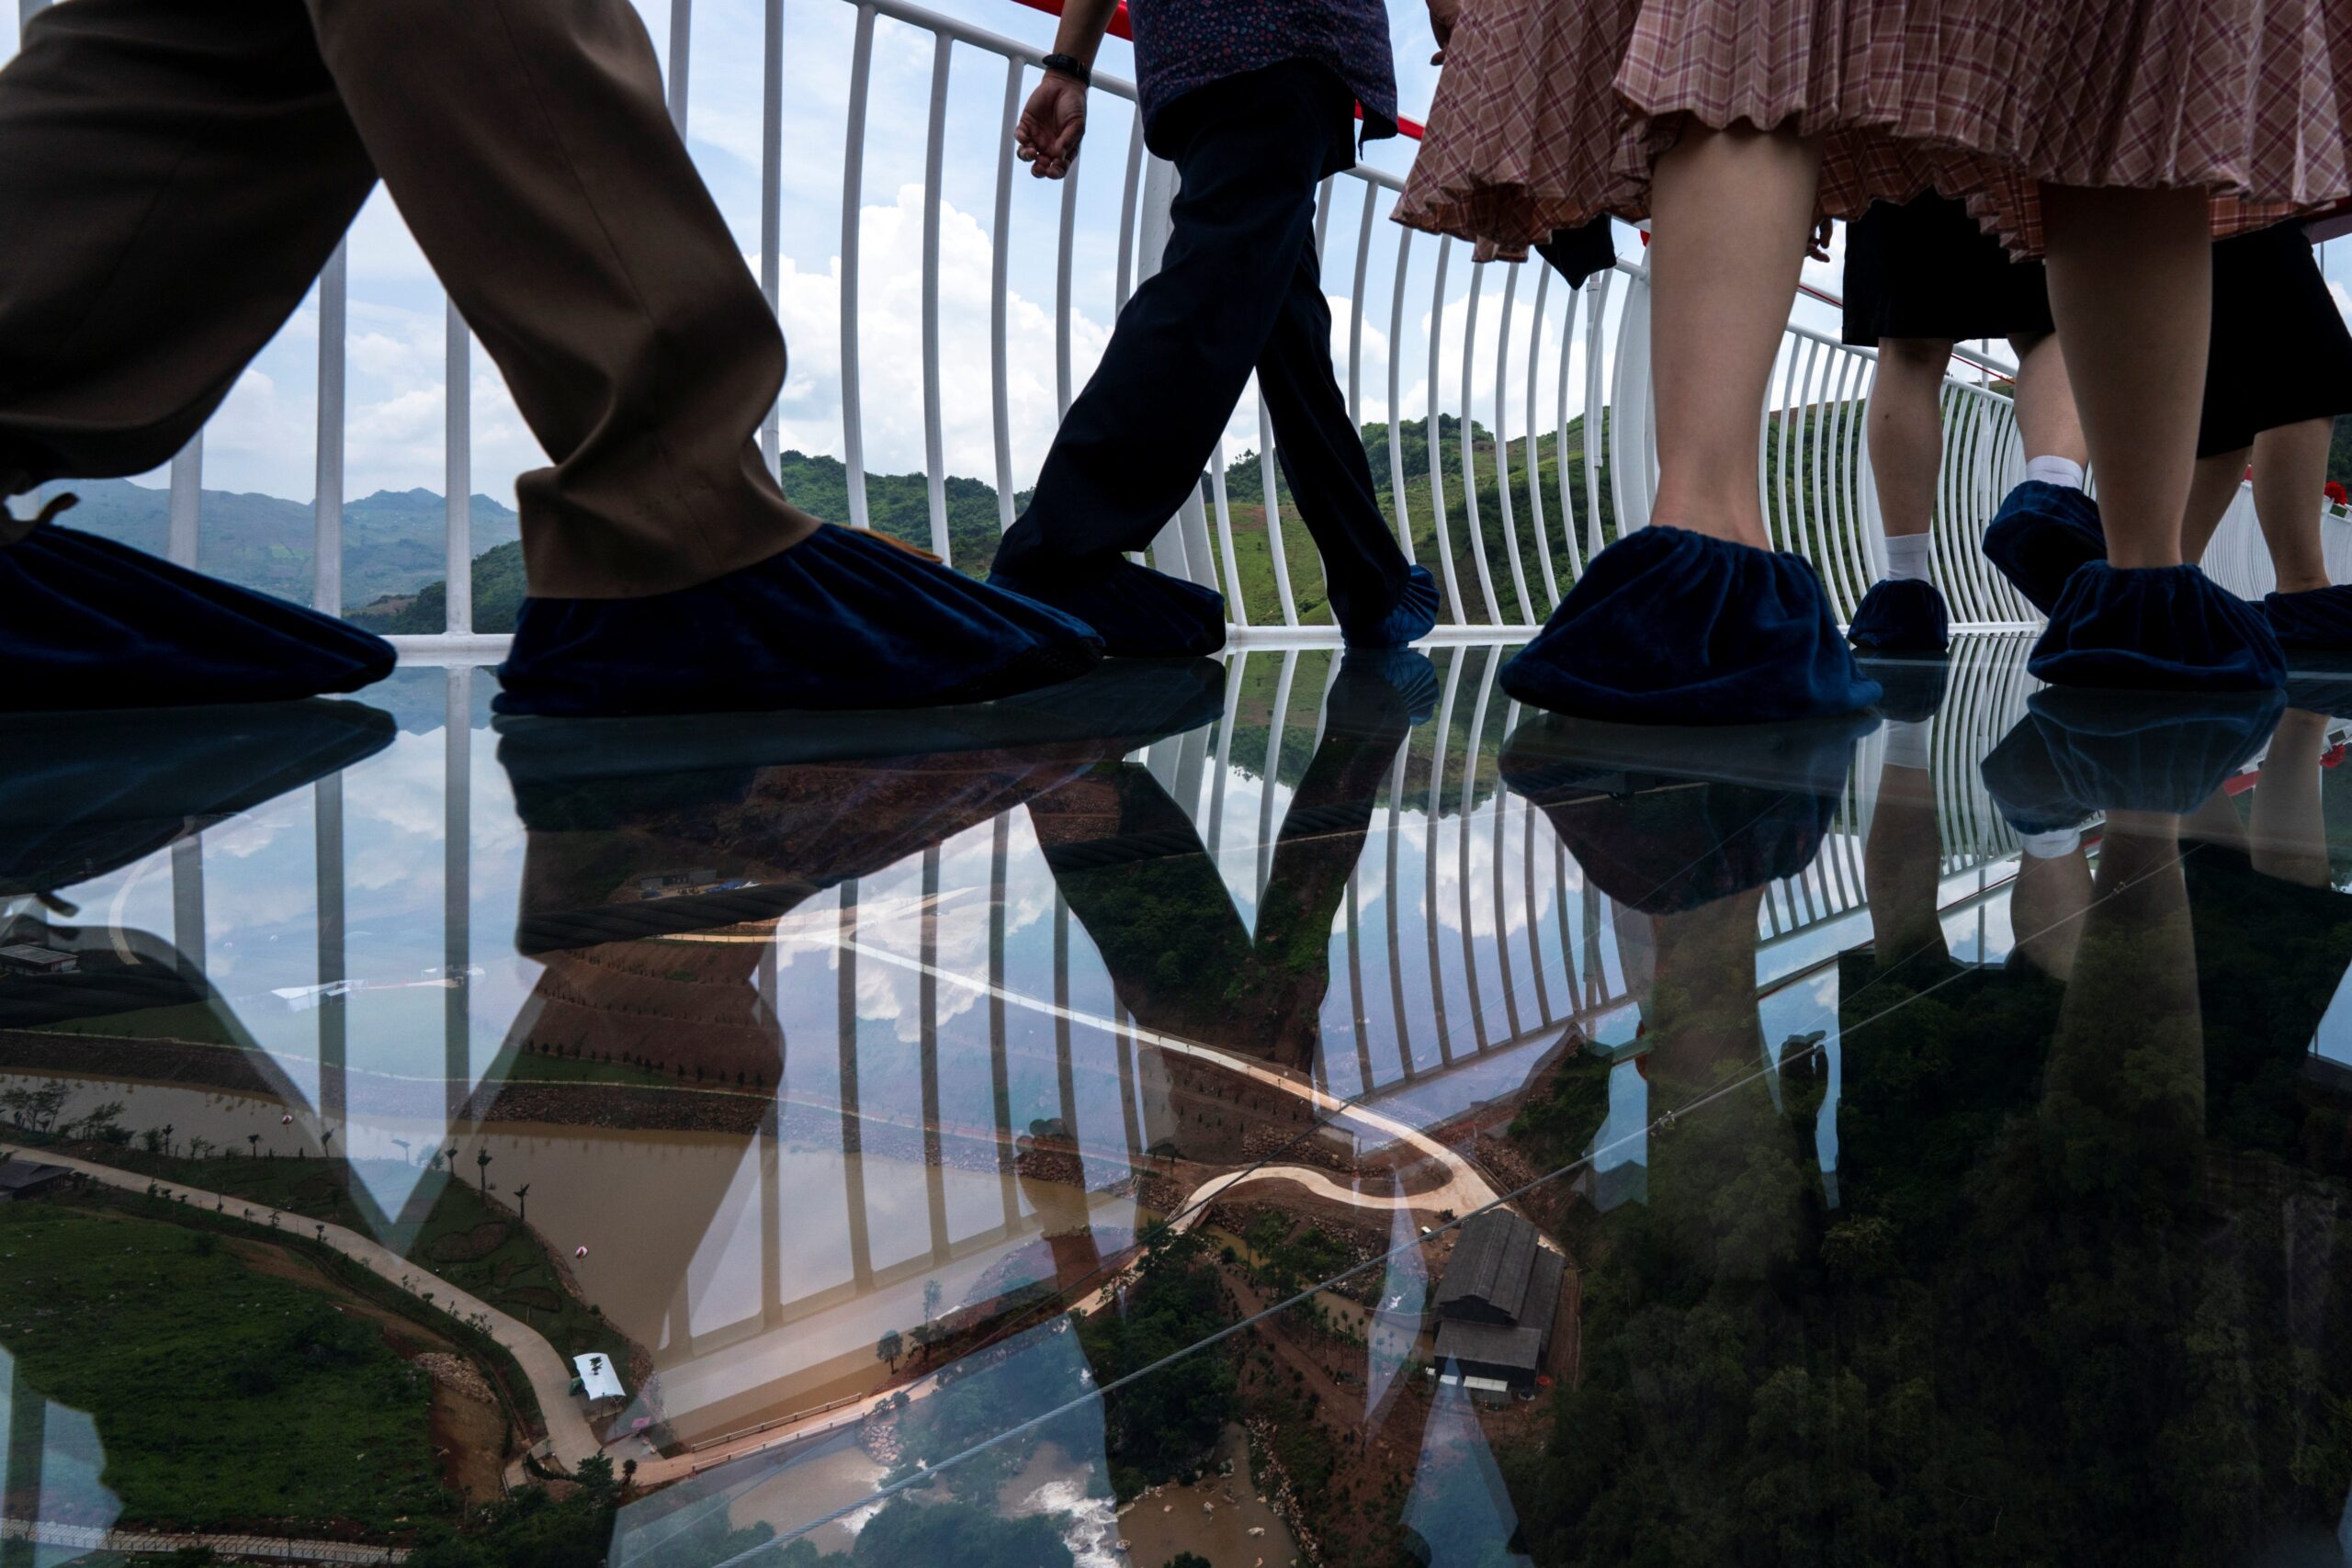 People walk on the Bach Long glass bridge during the opening ceremony at Moc Chau district in Son La province, Vietnam, May 28, 2022